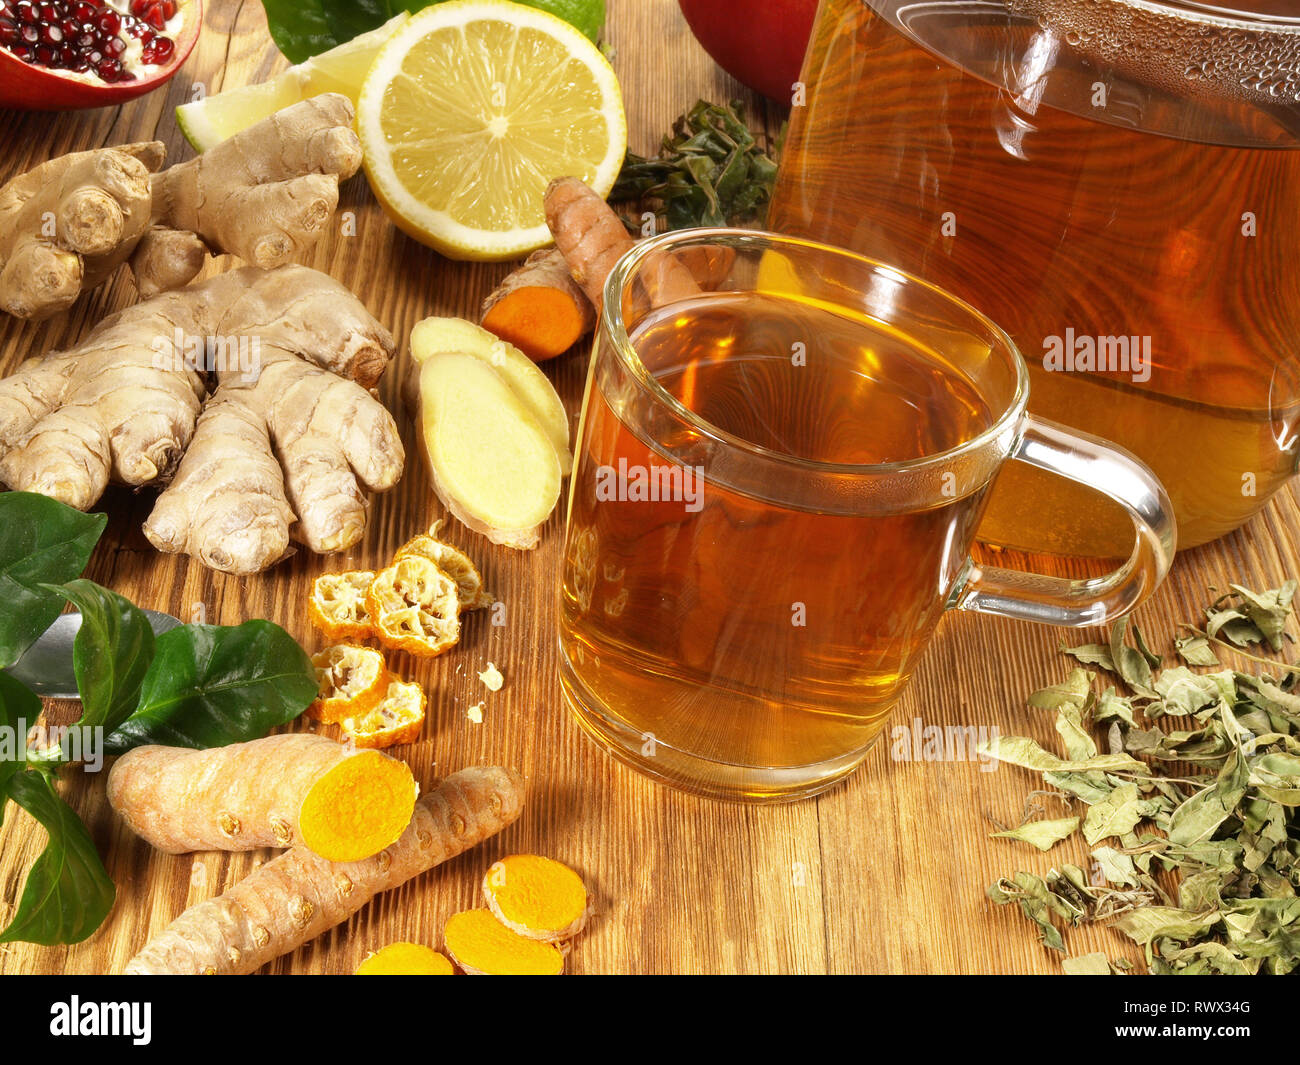 Tea with different ingredients on wooden Background Stock Photo